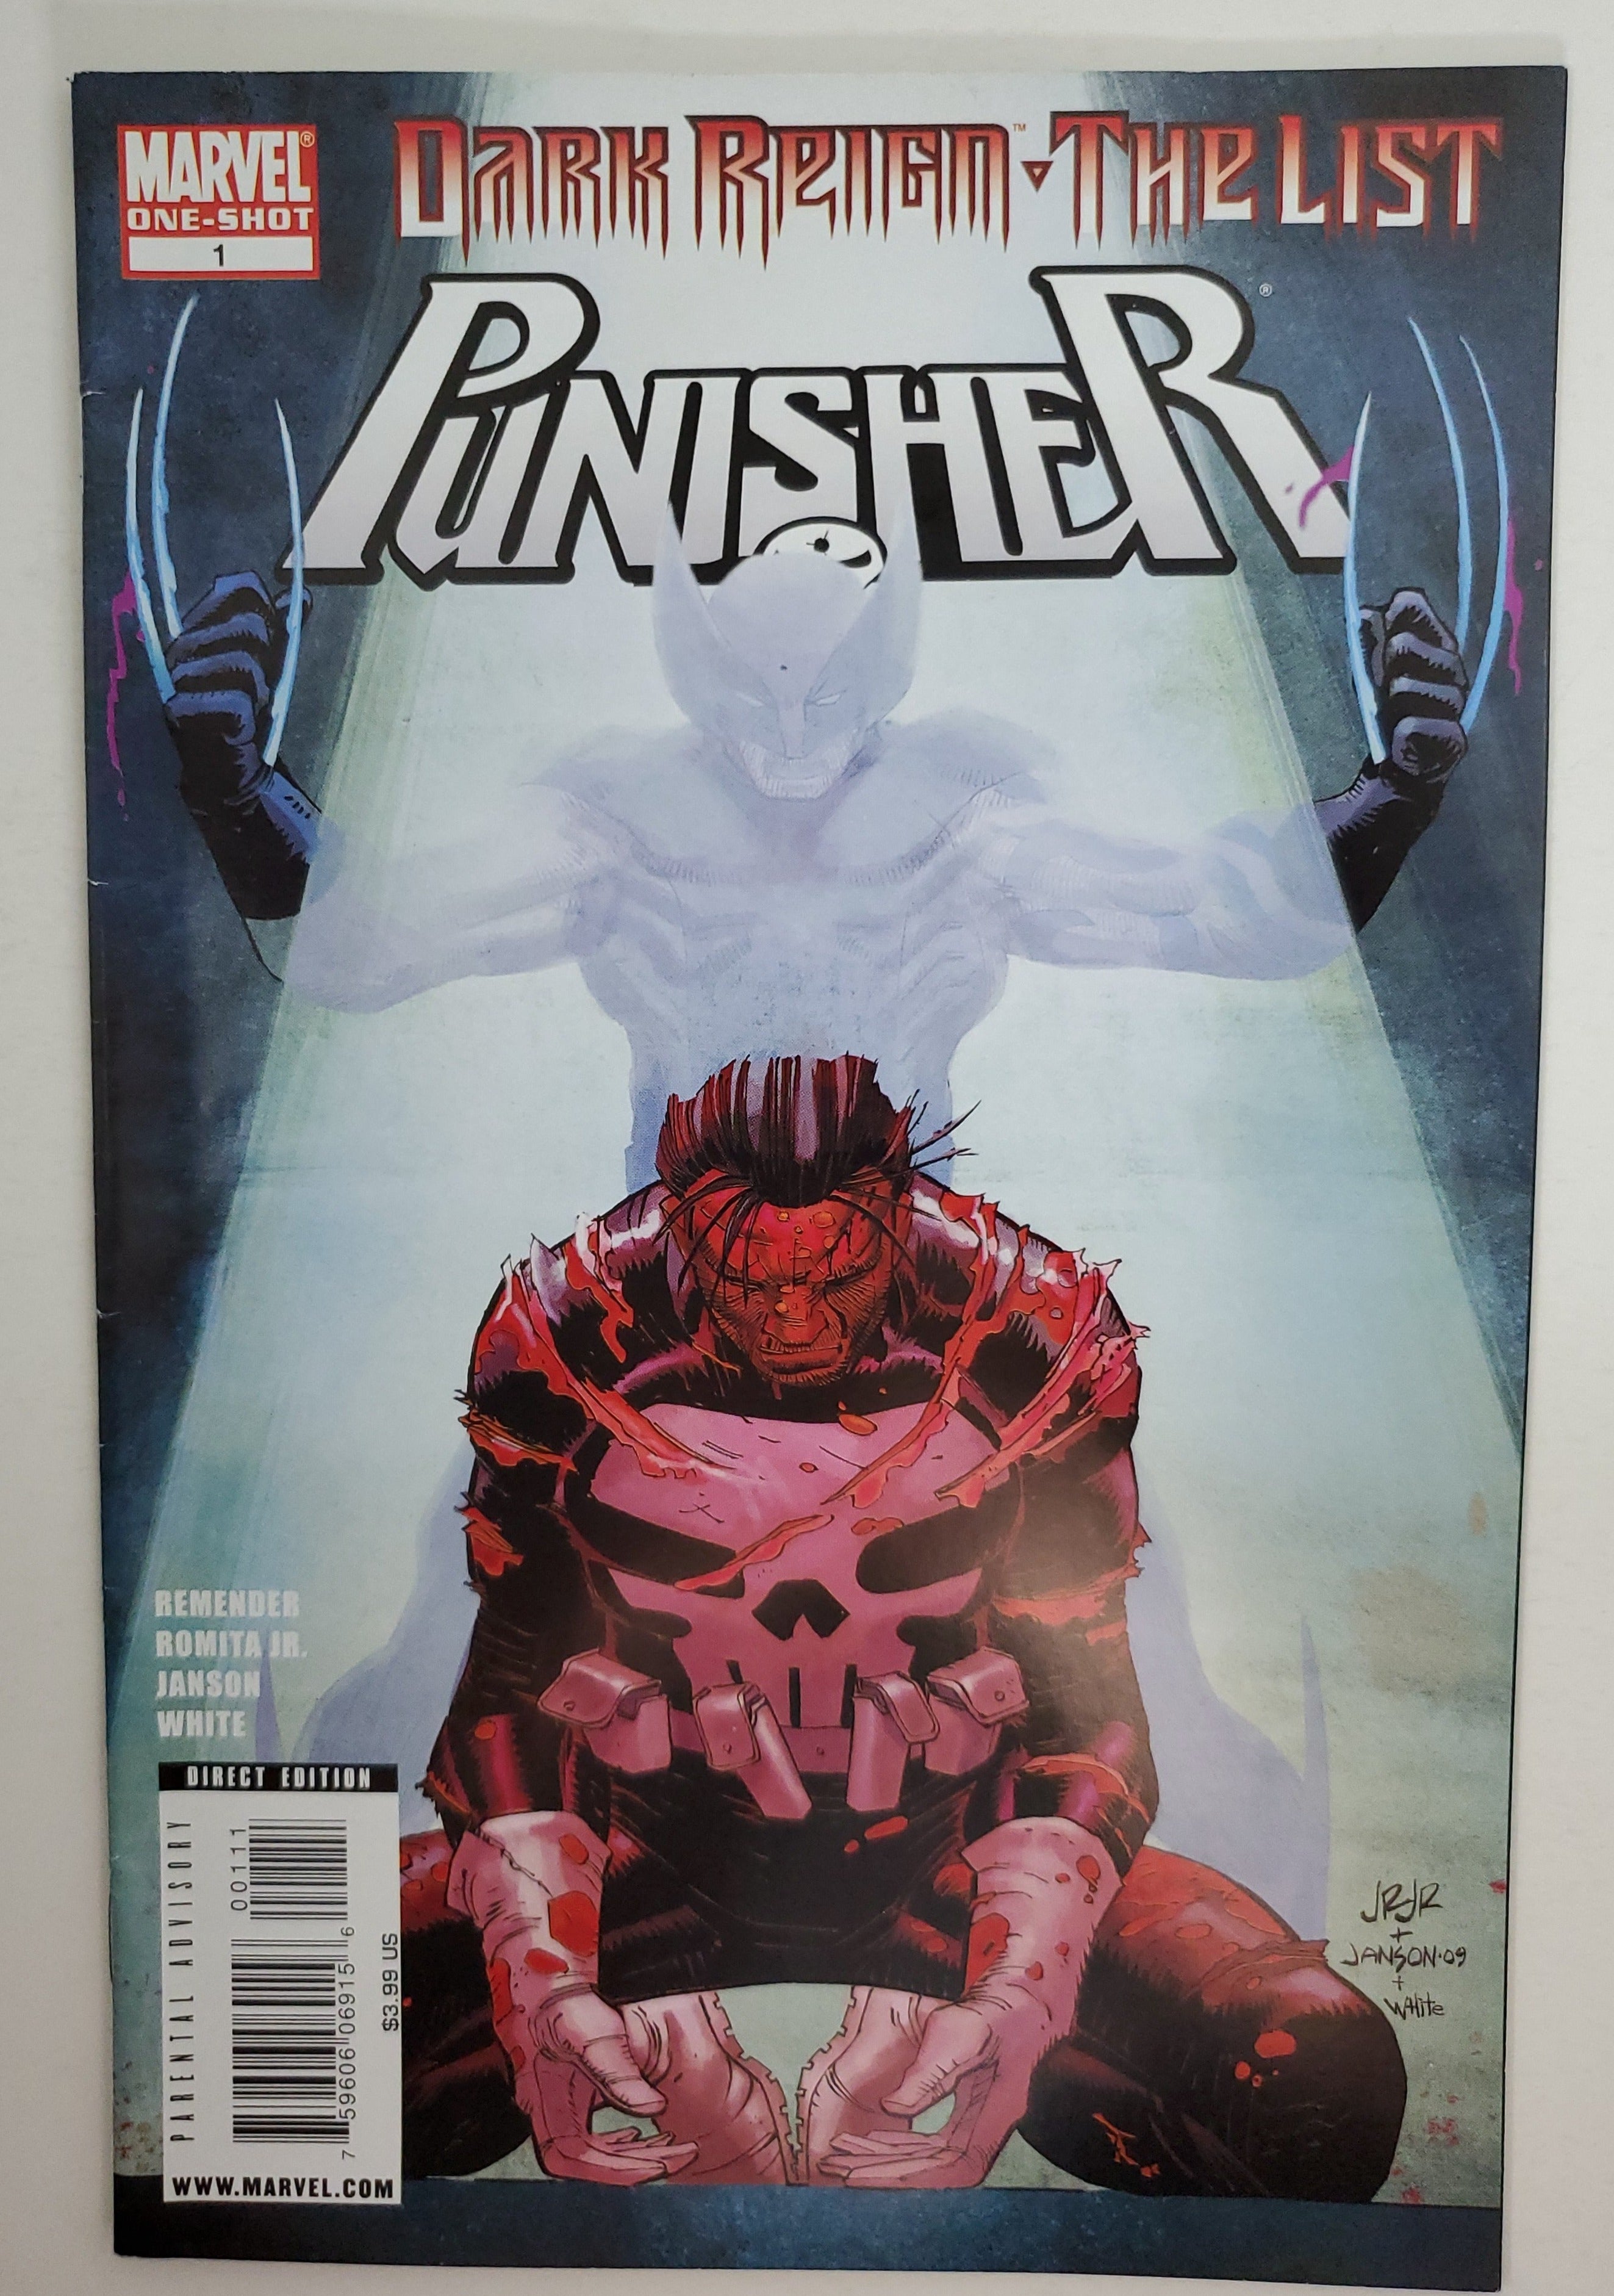 Pastime　One-Shot　and　–　The　Punisher　Comics　Vol　List　Dark　#1　Reign　Marvel　Collectibles